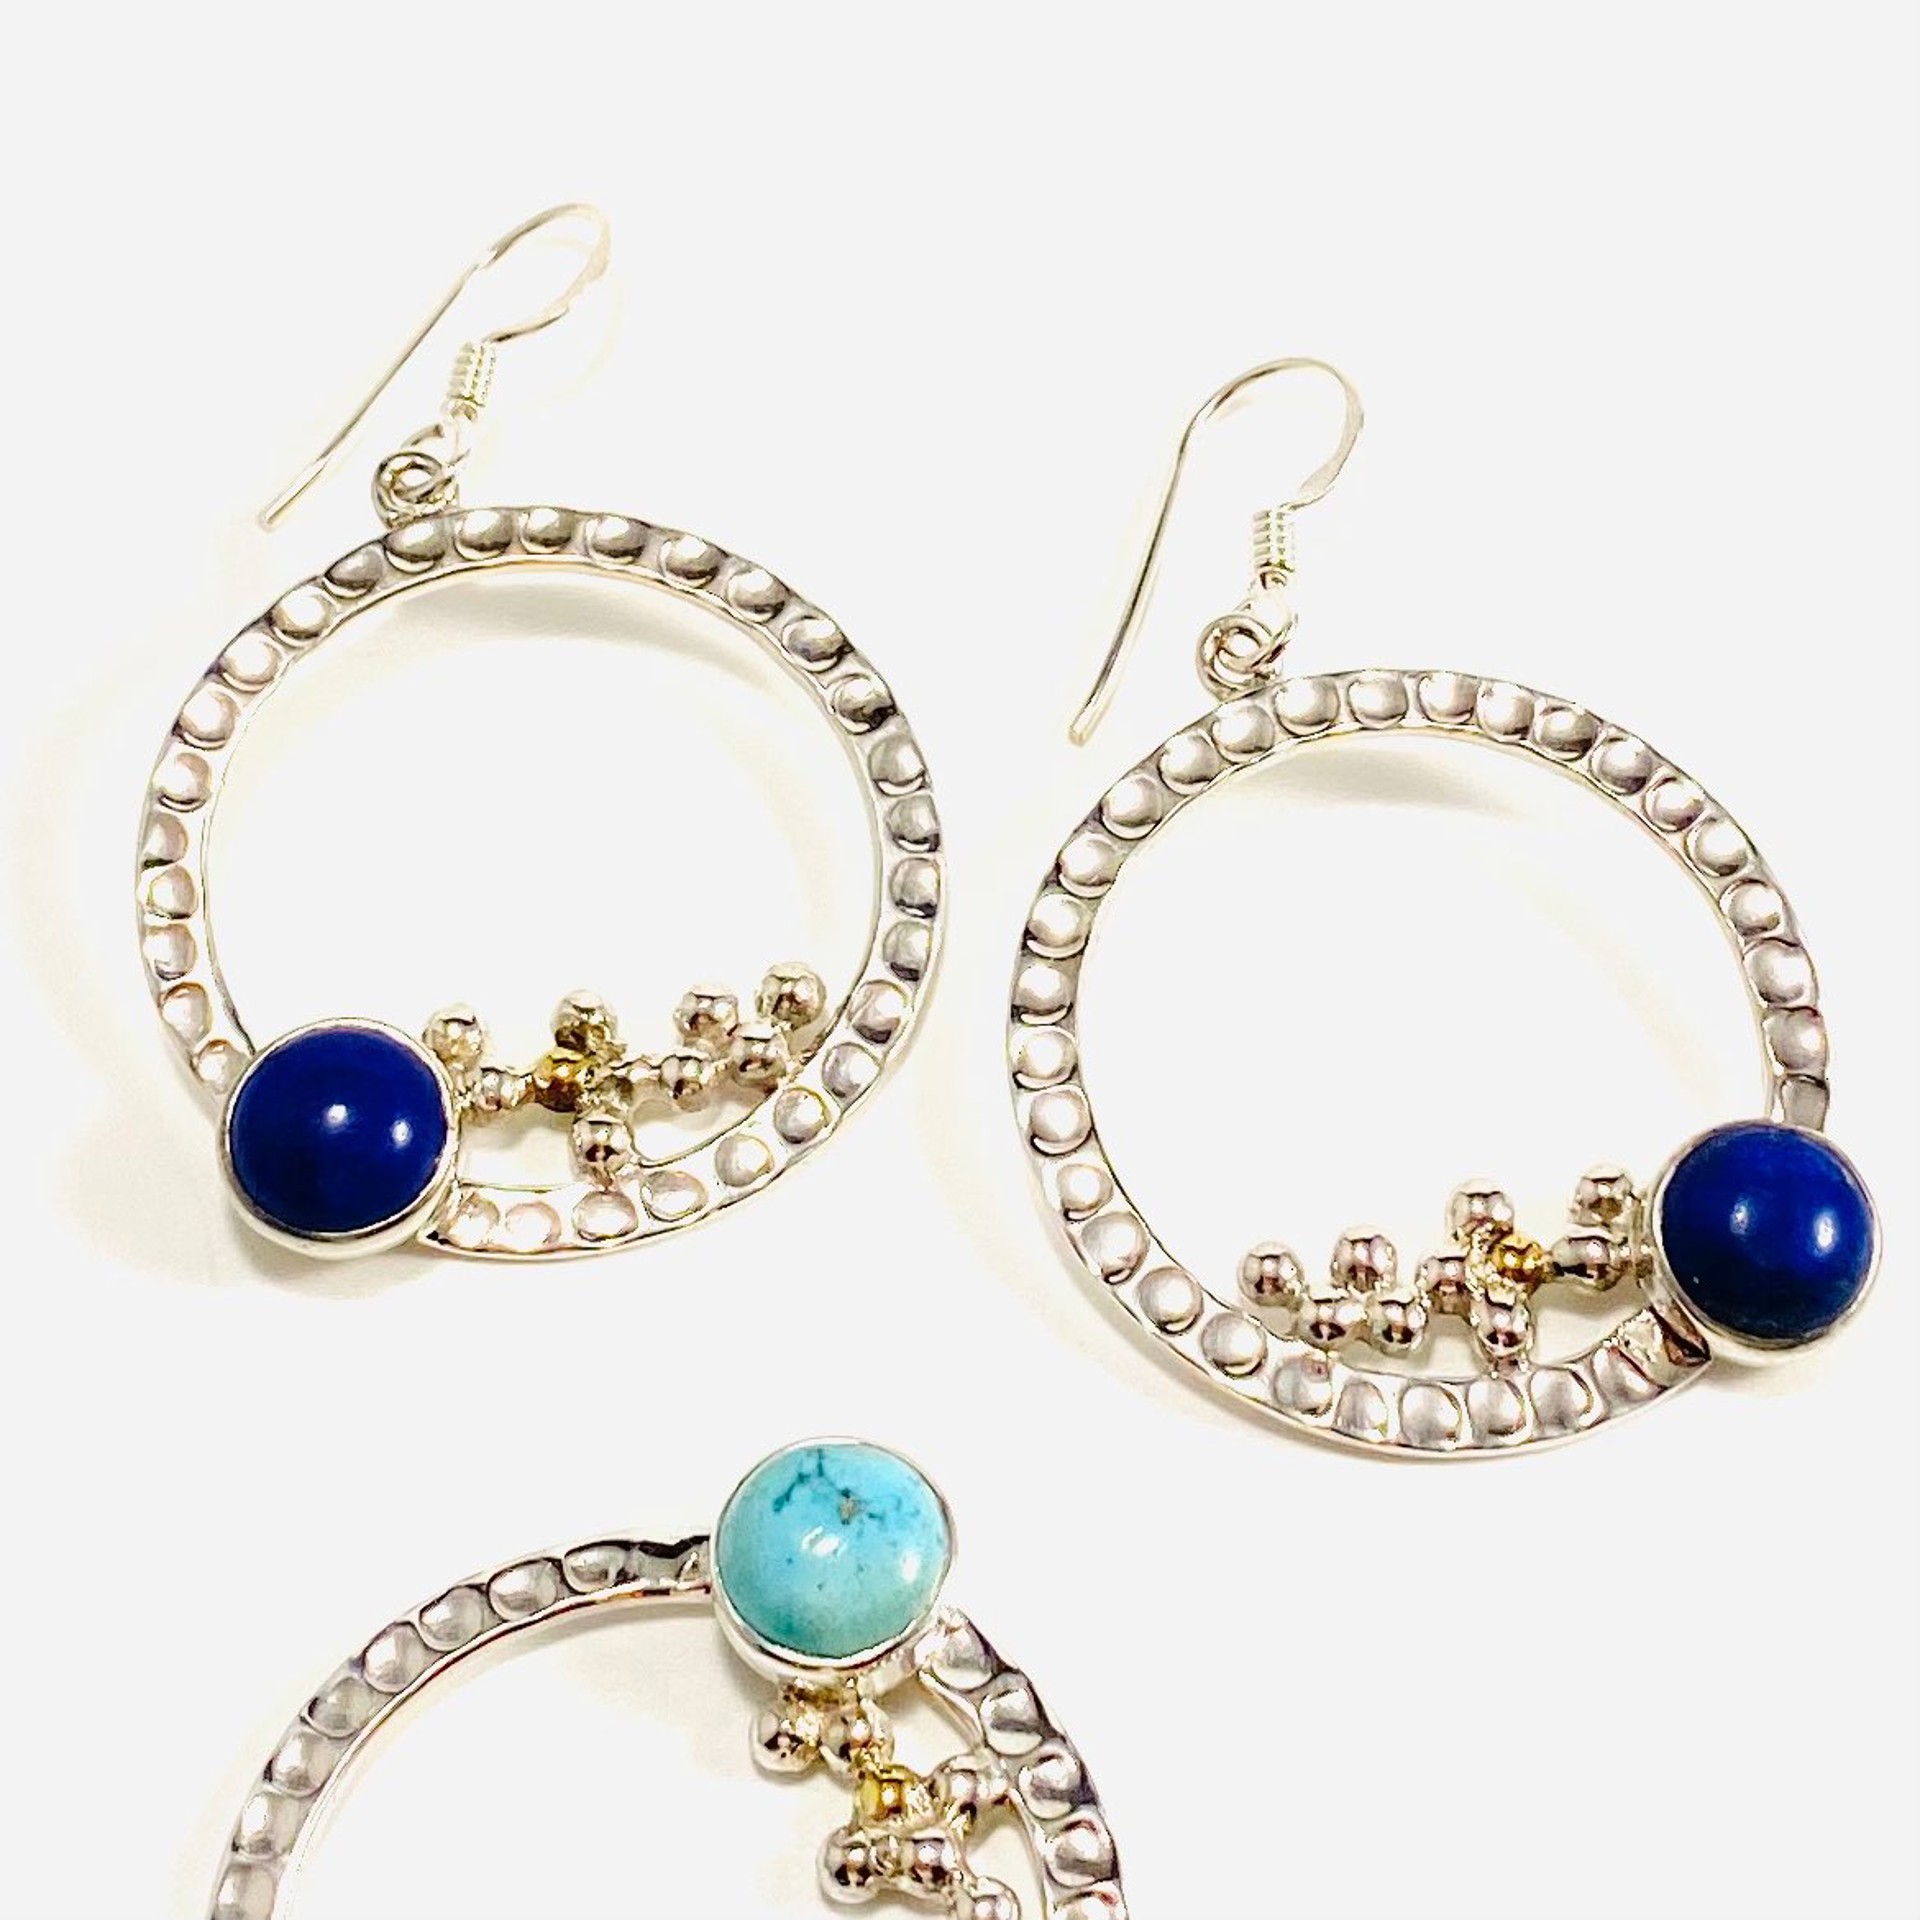 MON SE 863 Lapis or Turquoise Earrings, french wire clasp by Monica Mehta